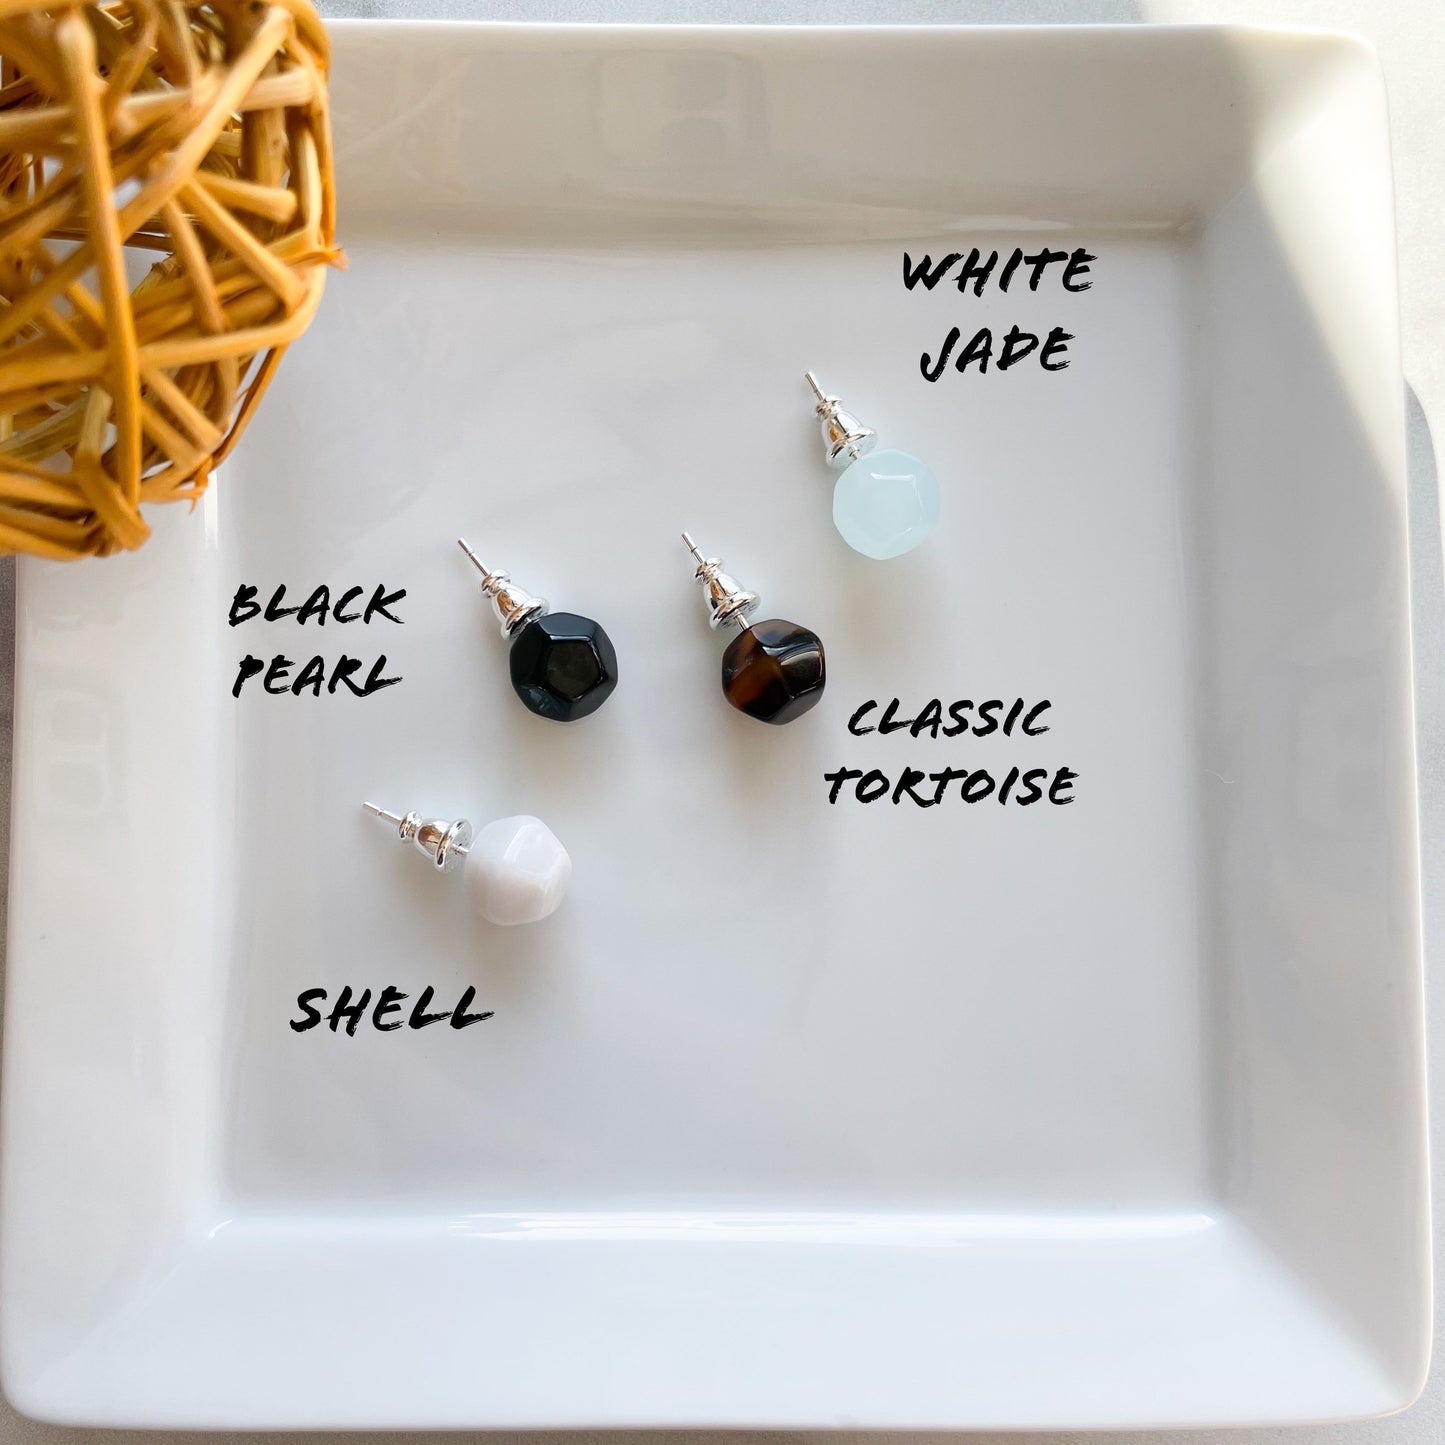 Kaleidoscope Studs In Tortoise, Shell, Black Pearl and White Jade Small Circle Sphere Ball Stud Earrings 925 Sterling Silver Posts